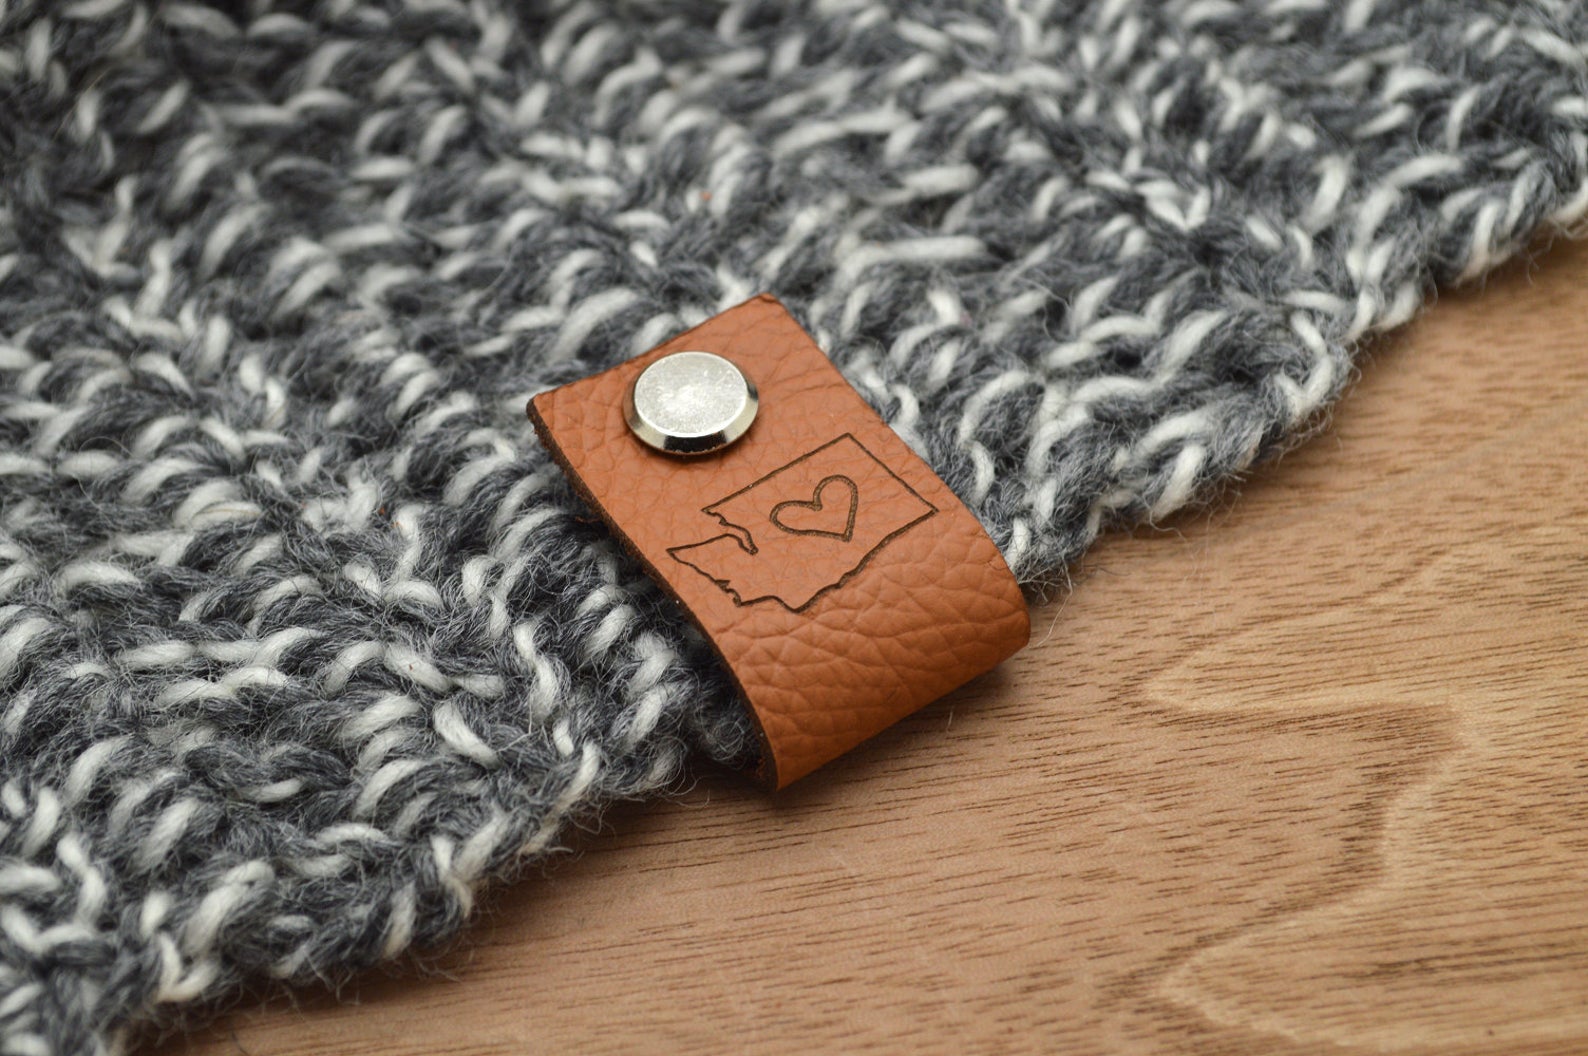 Custom Tags for Knits and Crochet, Faux Leather Labels for Handmade Items,  Leather Tags With Rivets, Tags for Knitted Hats 